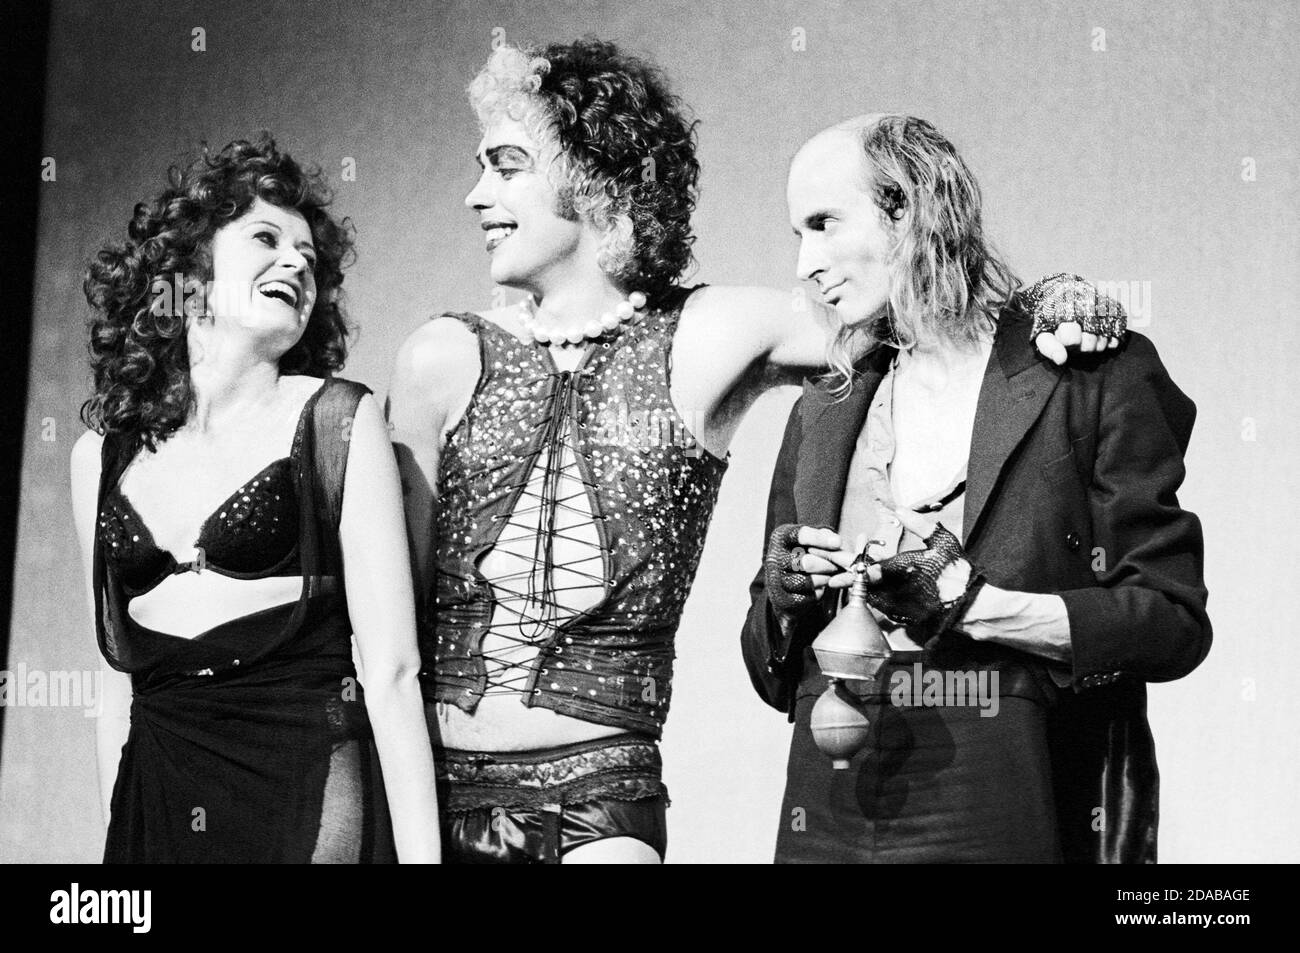 l-r: Patricia Quinn (Magenta), Tim Curry (Frank-n-furter), Richard O'Brien (Riff Raff) in THE ROCKY HORROR SHOW at the Chelsea Classic Cinema, London SW3 14/08/1973  transfer from the the Theatre Upstairs, Royal Court Theatre  book, music & lyrics by Richard O'Brien  set design: Brian Thomson  costumes: Sue Blane  lighting: Gerry Jenkinson  director: Jim Sharman Stock Photo